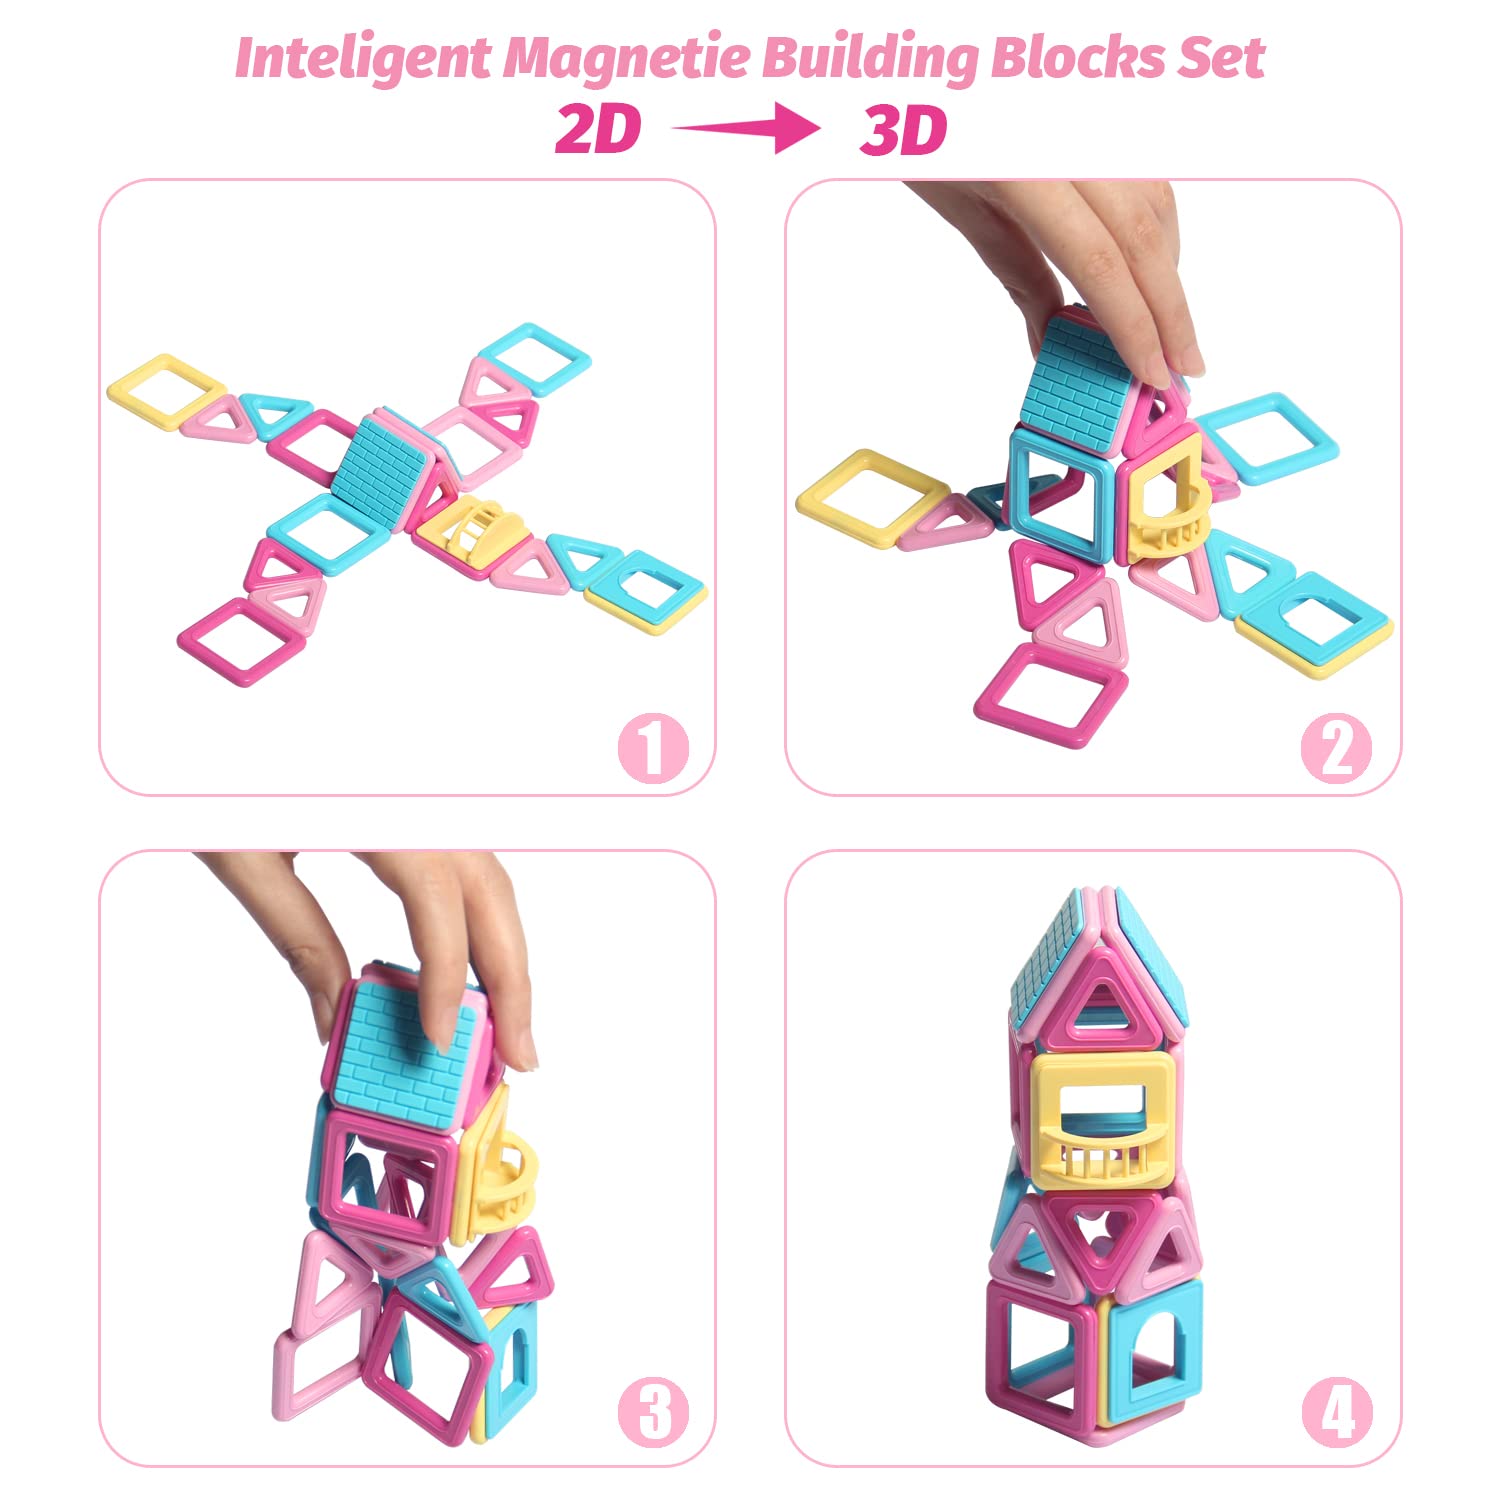 Magnetic Tiles for 3 4 5 6 7 8+ Year Old Boys Girls Magnetic Blocks Building Set for Kids Ages 3-6, Creativity and Educational Construction Toys for Toddlers 3-5 Christmas Birthday Gifts Toys-117PCS